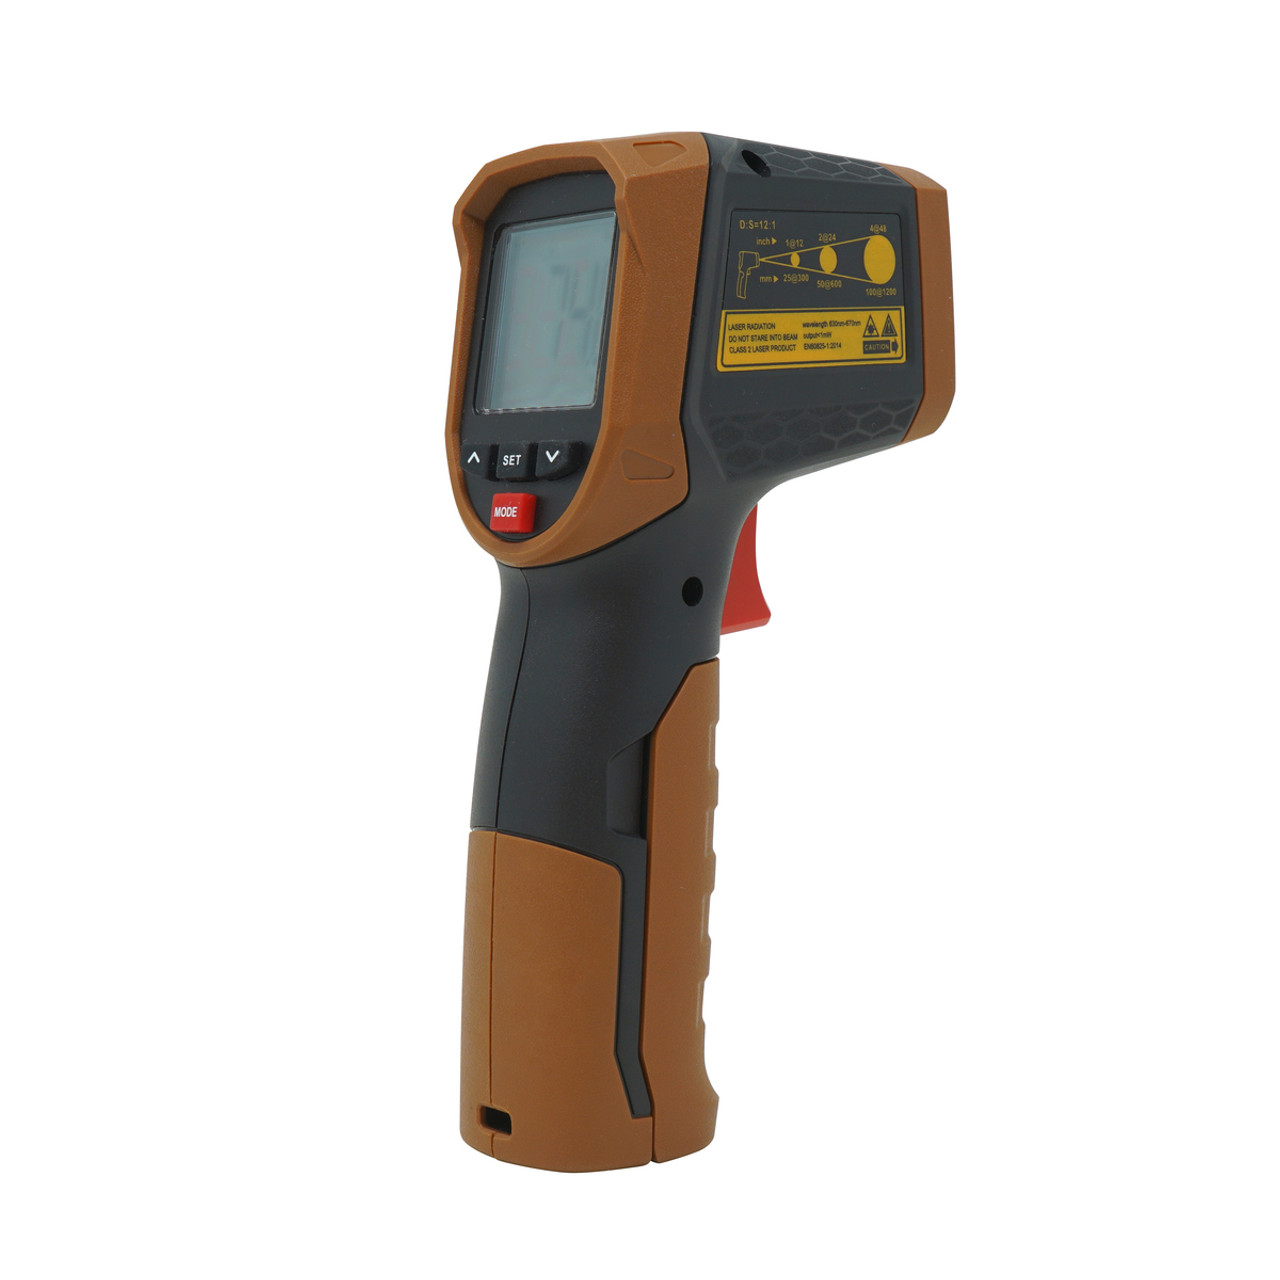 Dual-Laser Infrared Thermometer 20:1